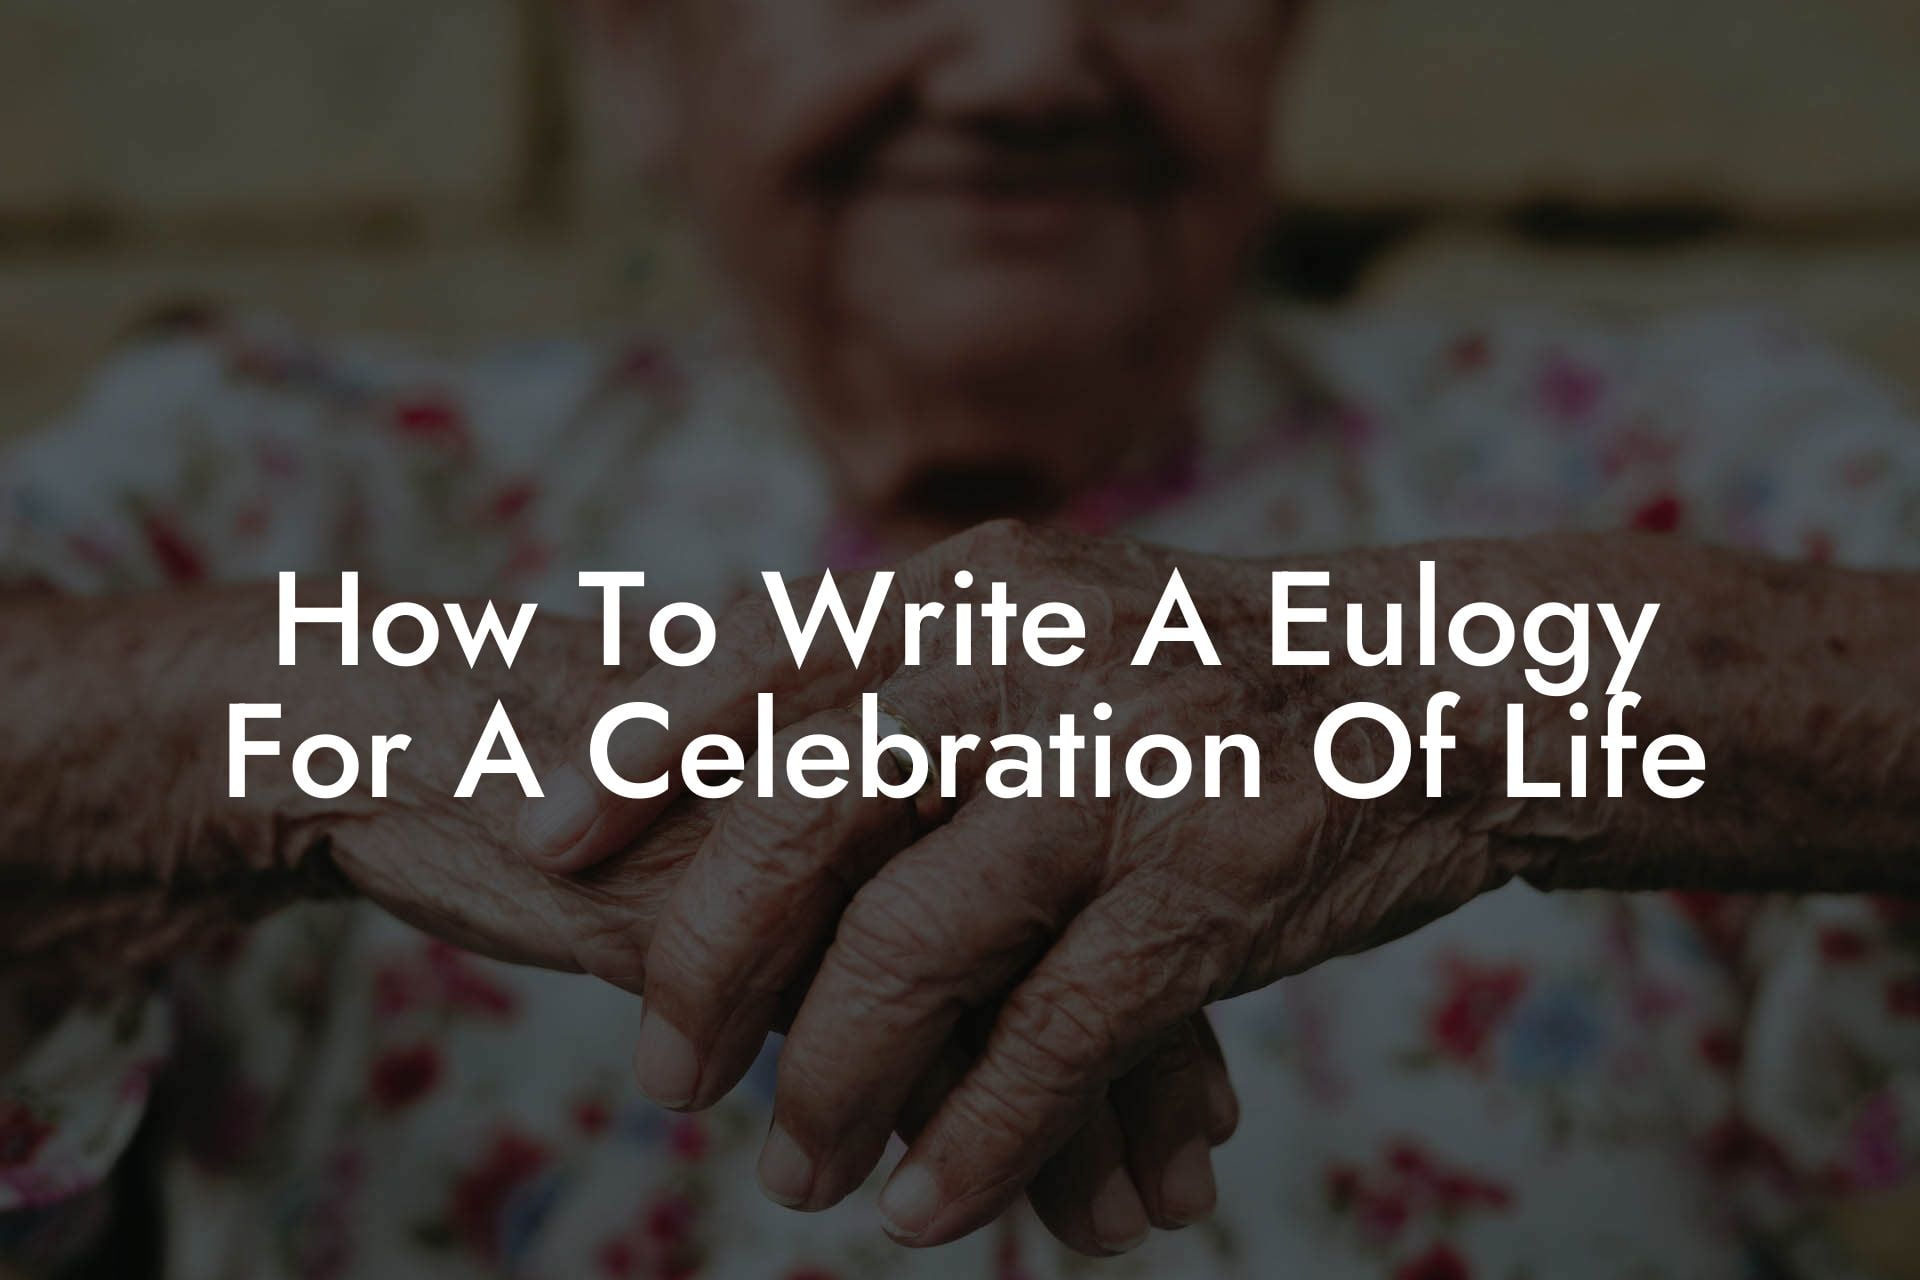 How To Write A Eulogy For A Celebration Of Life